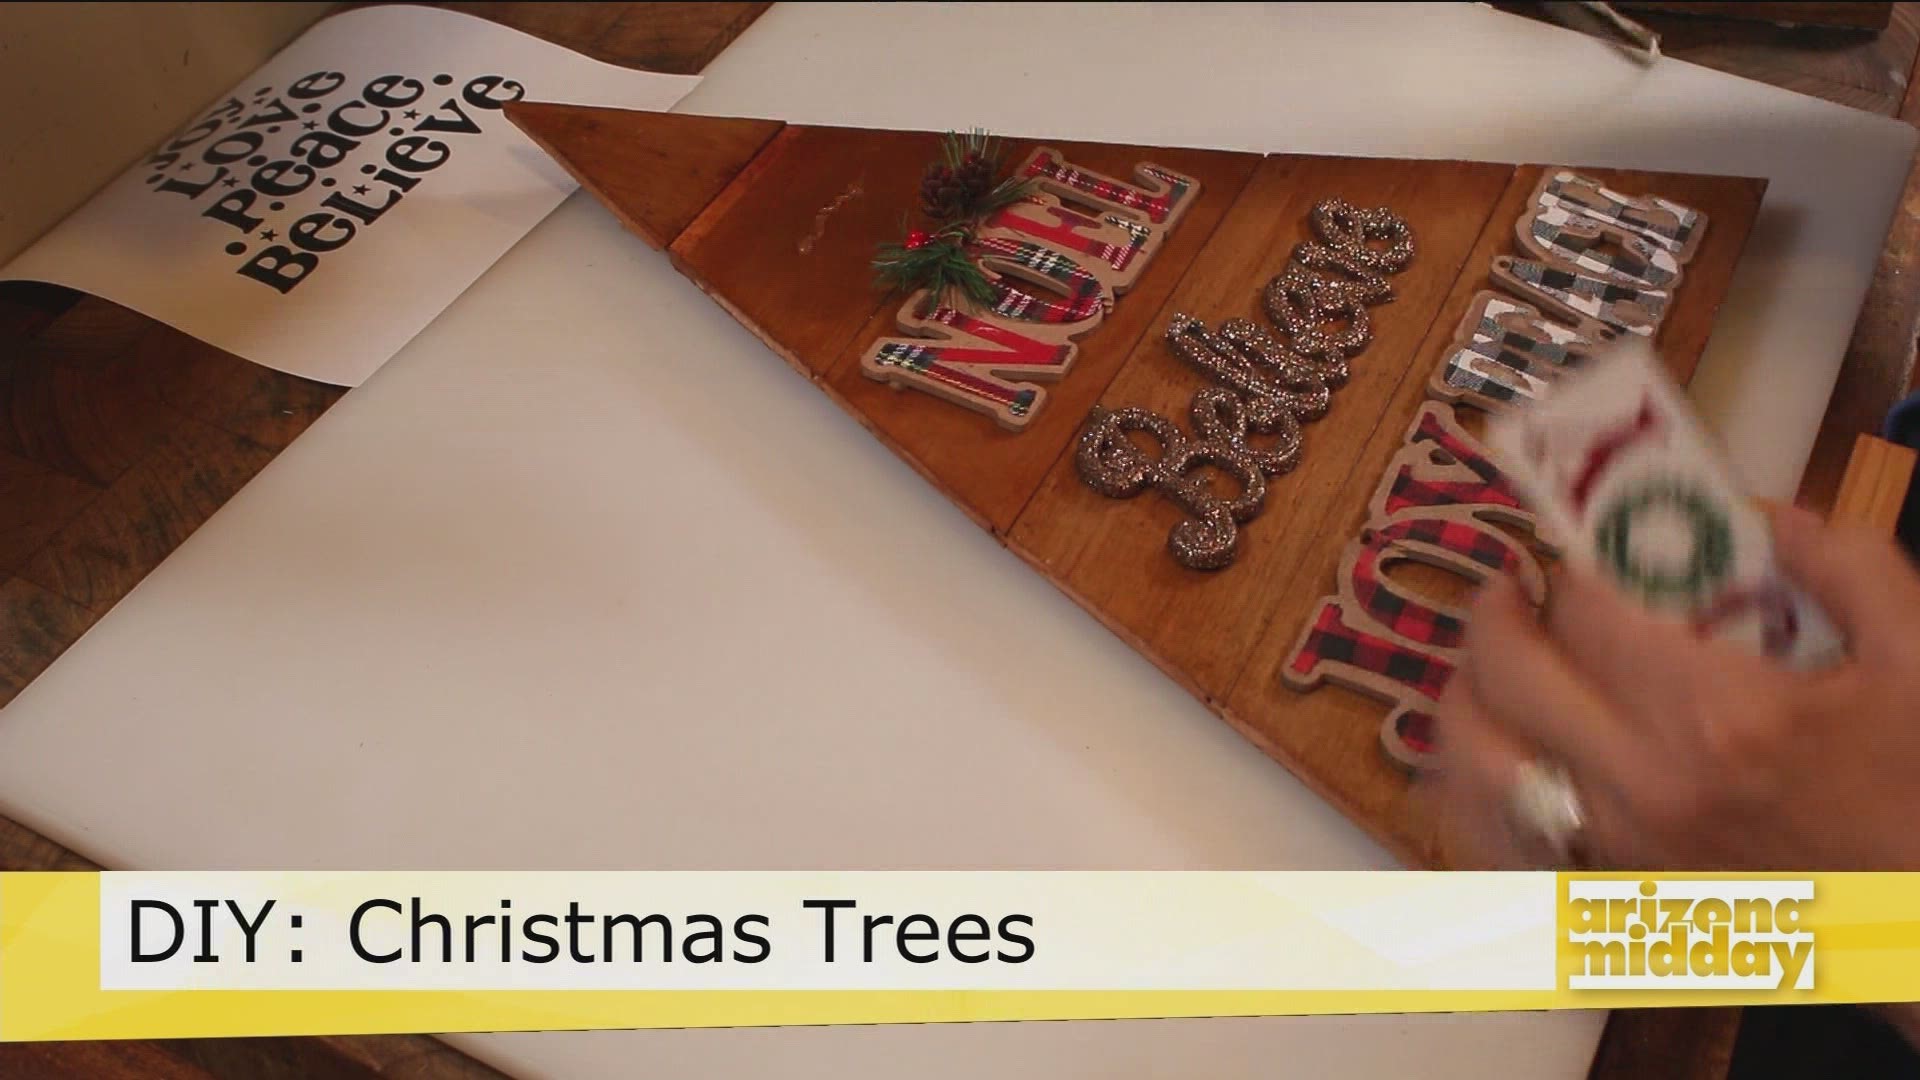 Jan shows us how to create these festive holiday trees